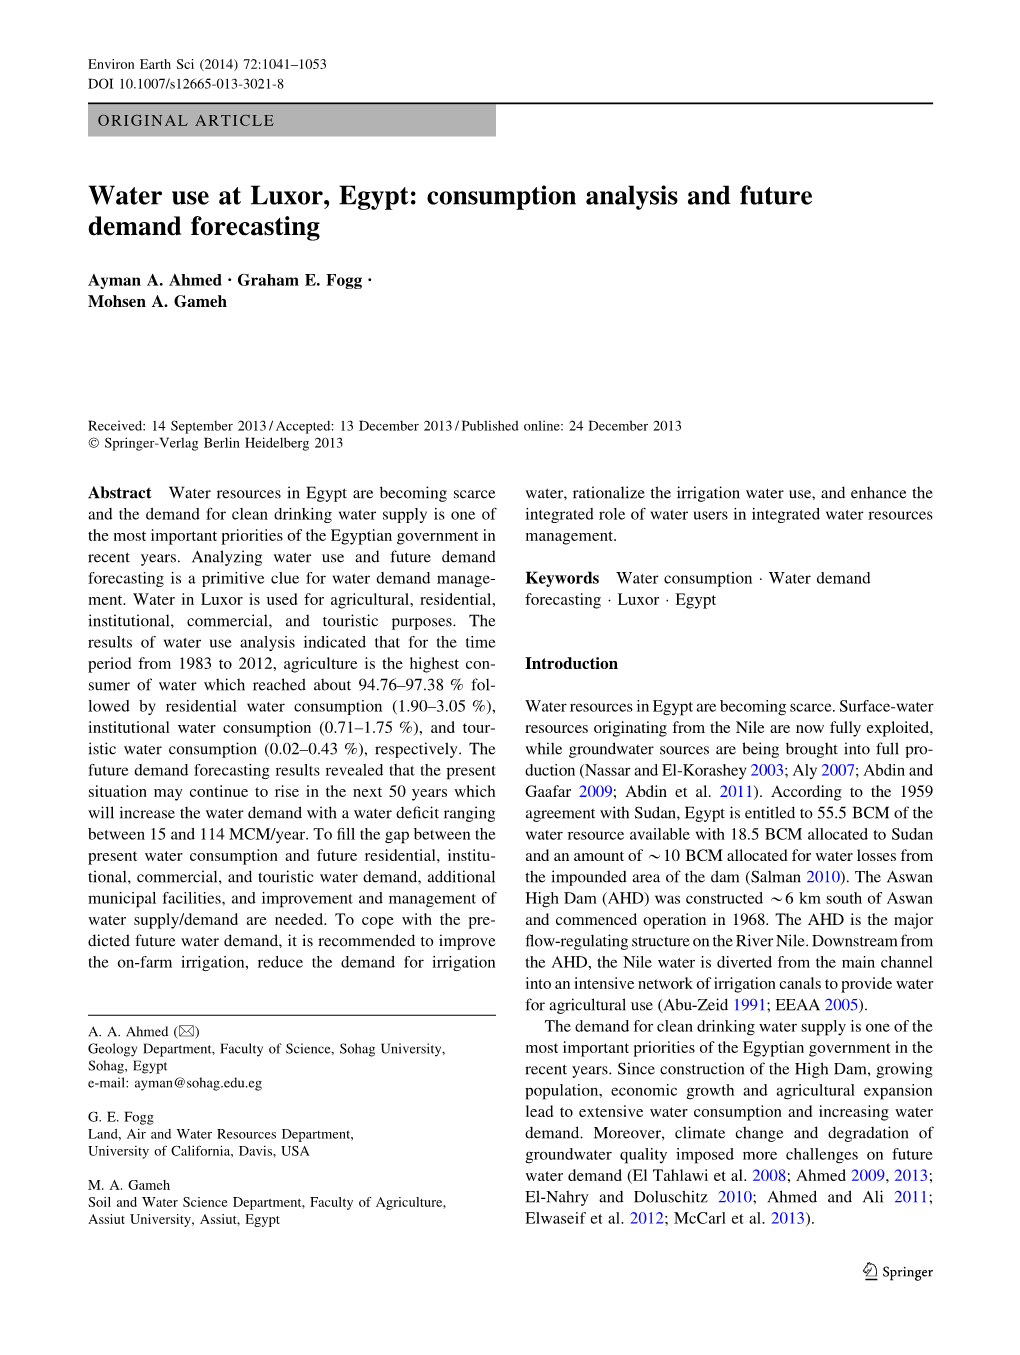 Water Use at Luxor, Egypt: Consumption Analysis and Future Demand Forecasting